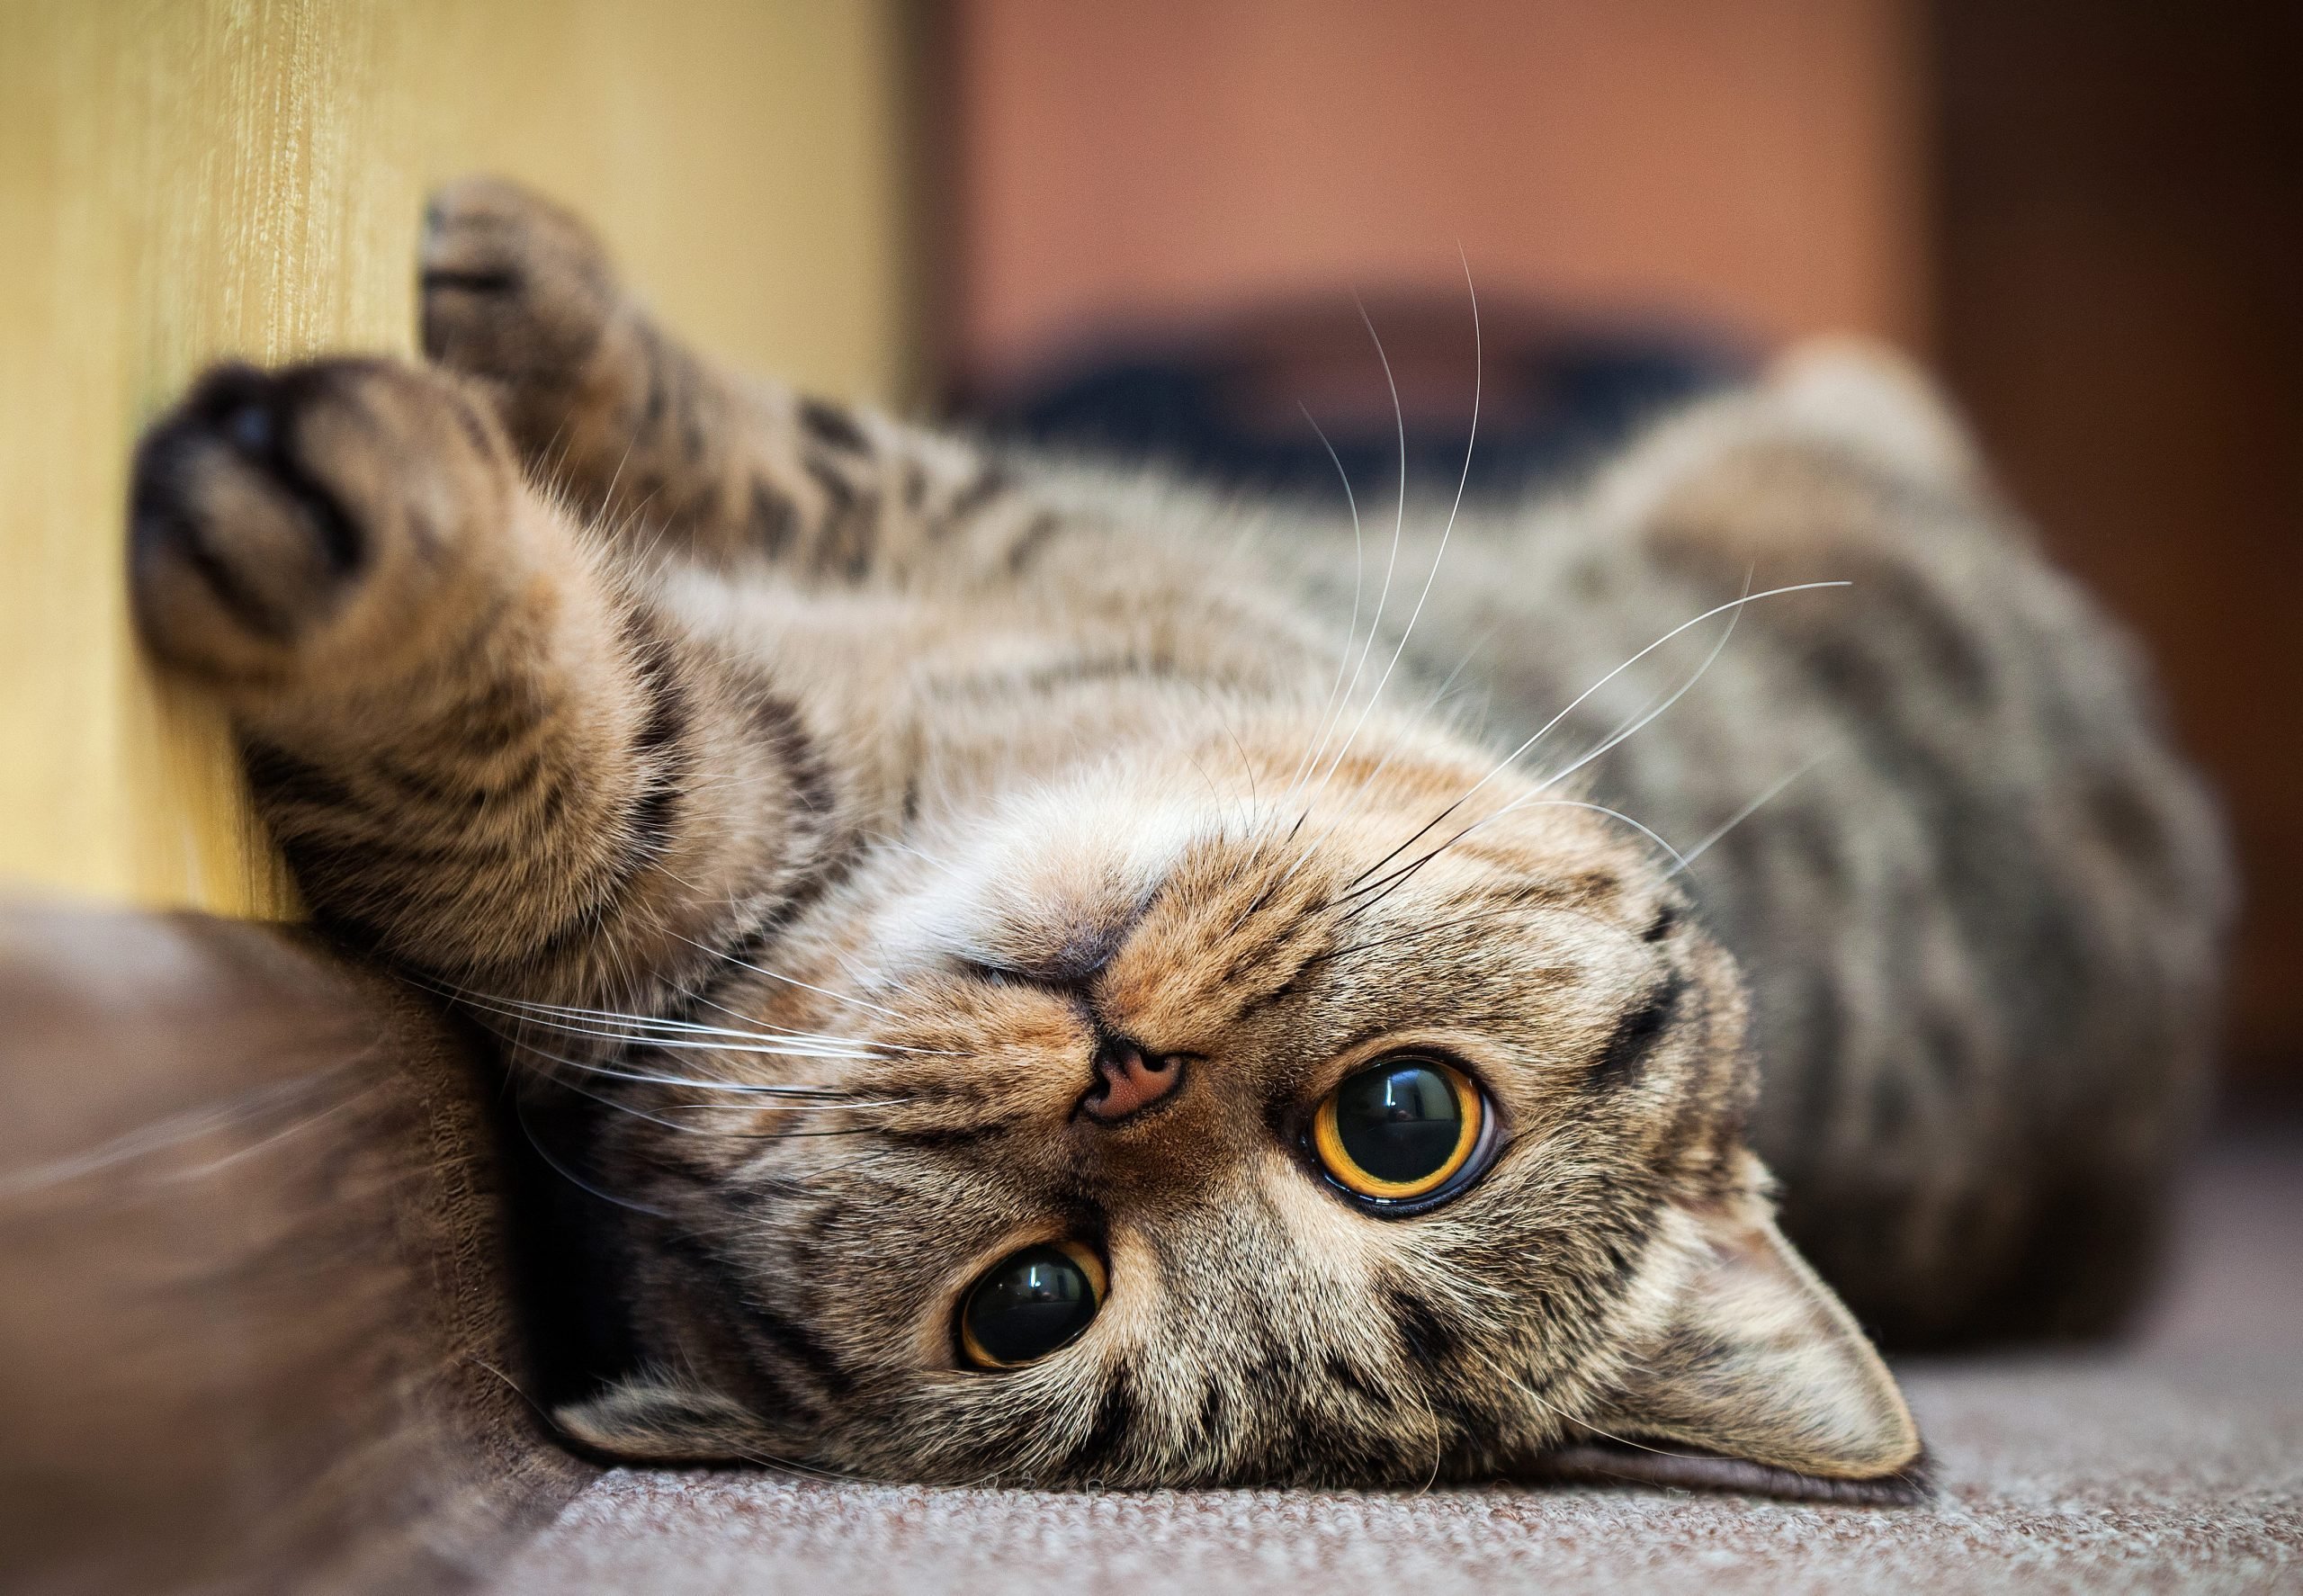 8 Signs Of A Happy Cat & How To Make Your Cat Happier